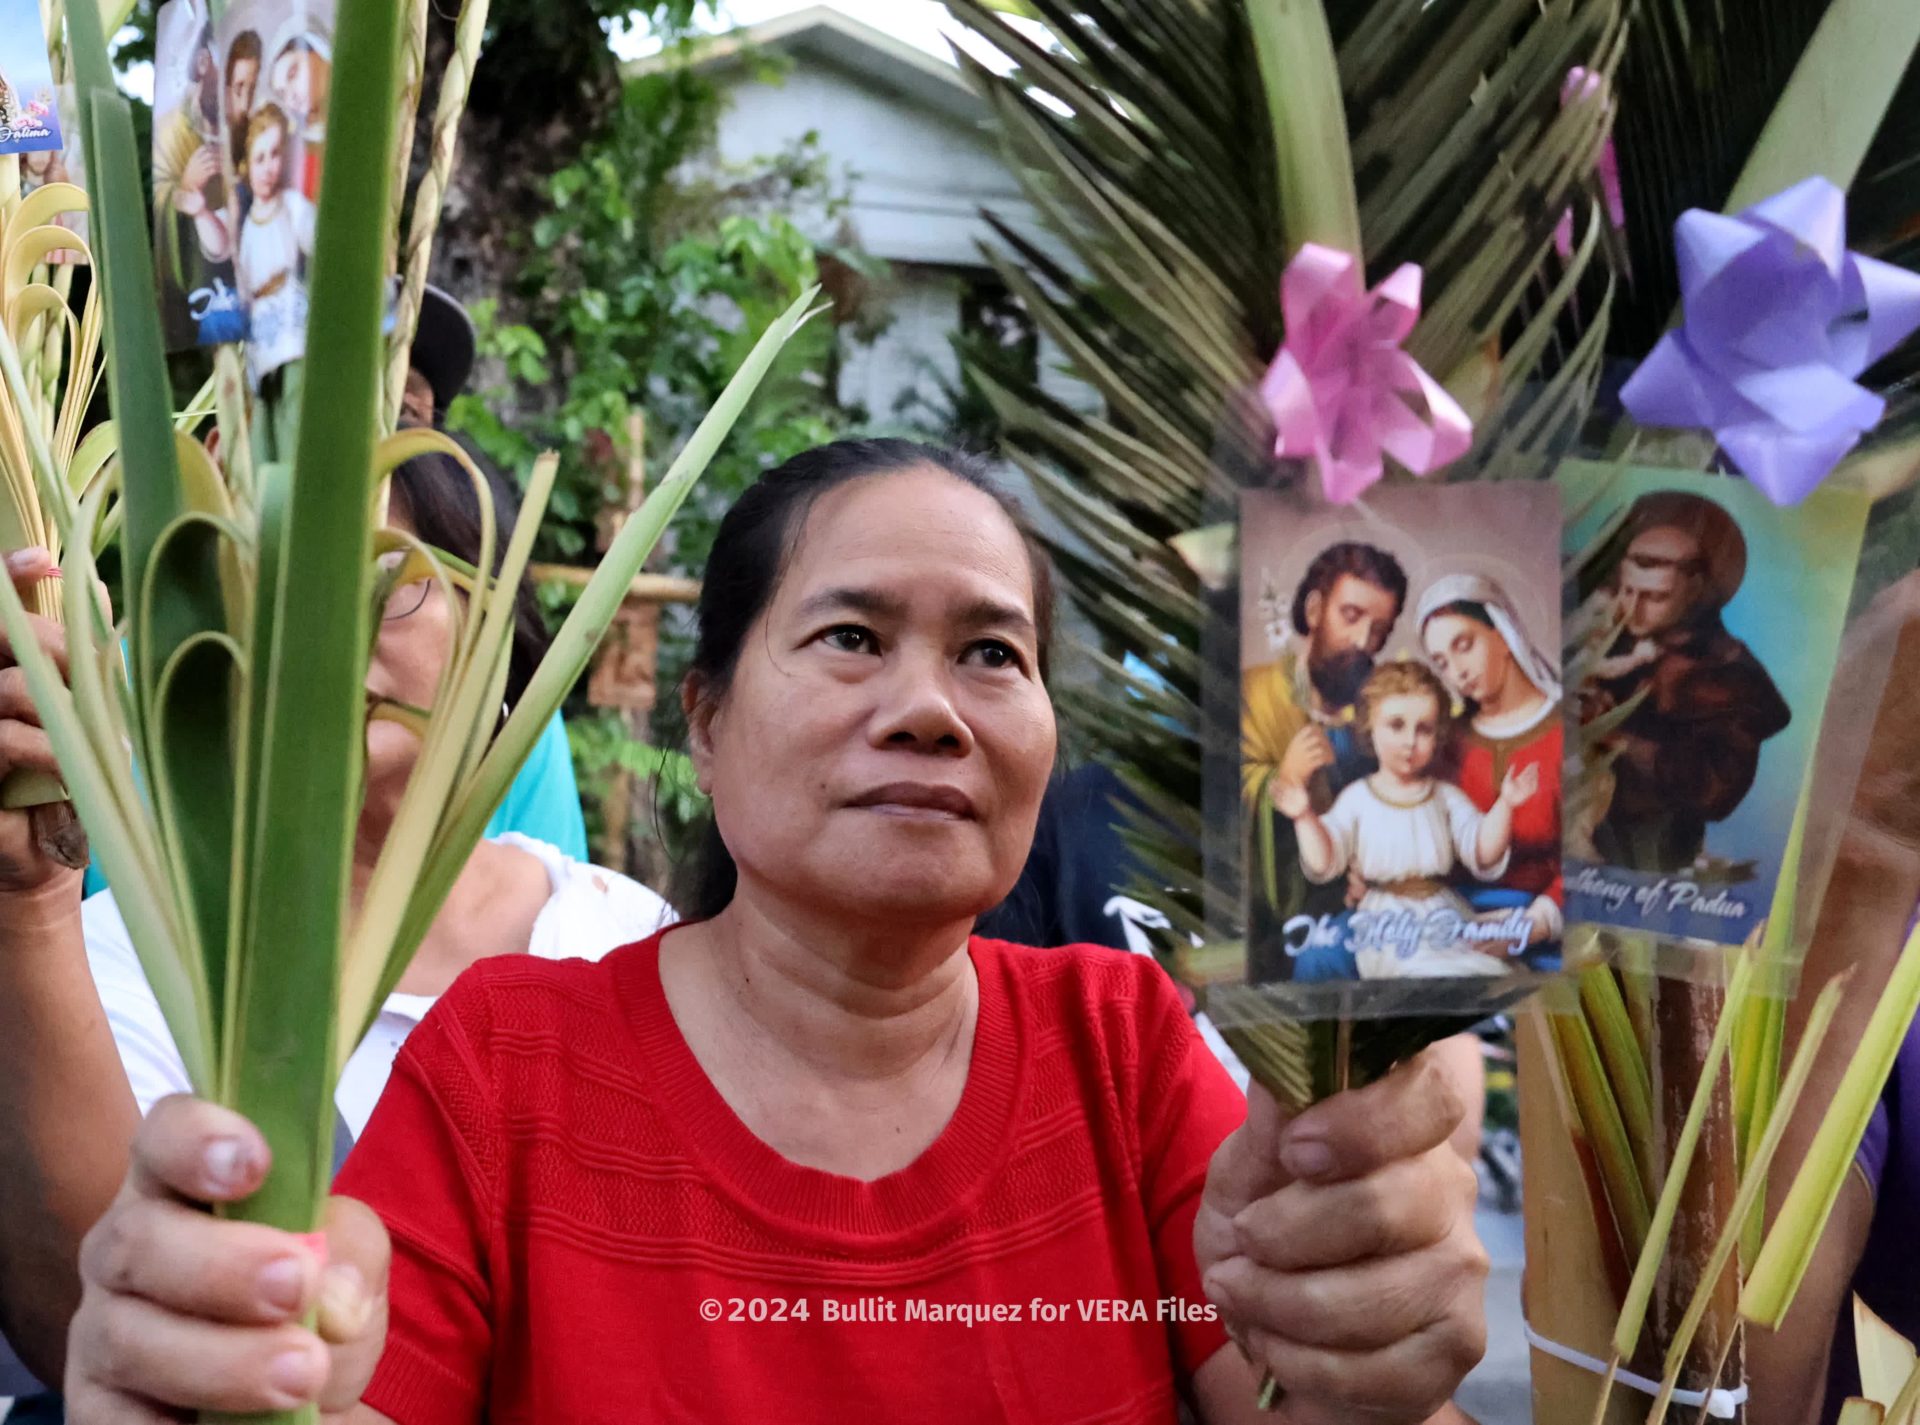 Colorful Palm Sunday marks the concluding week of Lent 14/18 Photo by Bullit Marquez for VERA Files